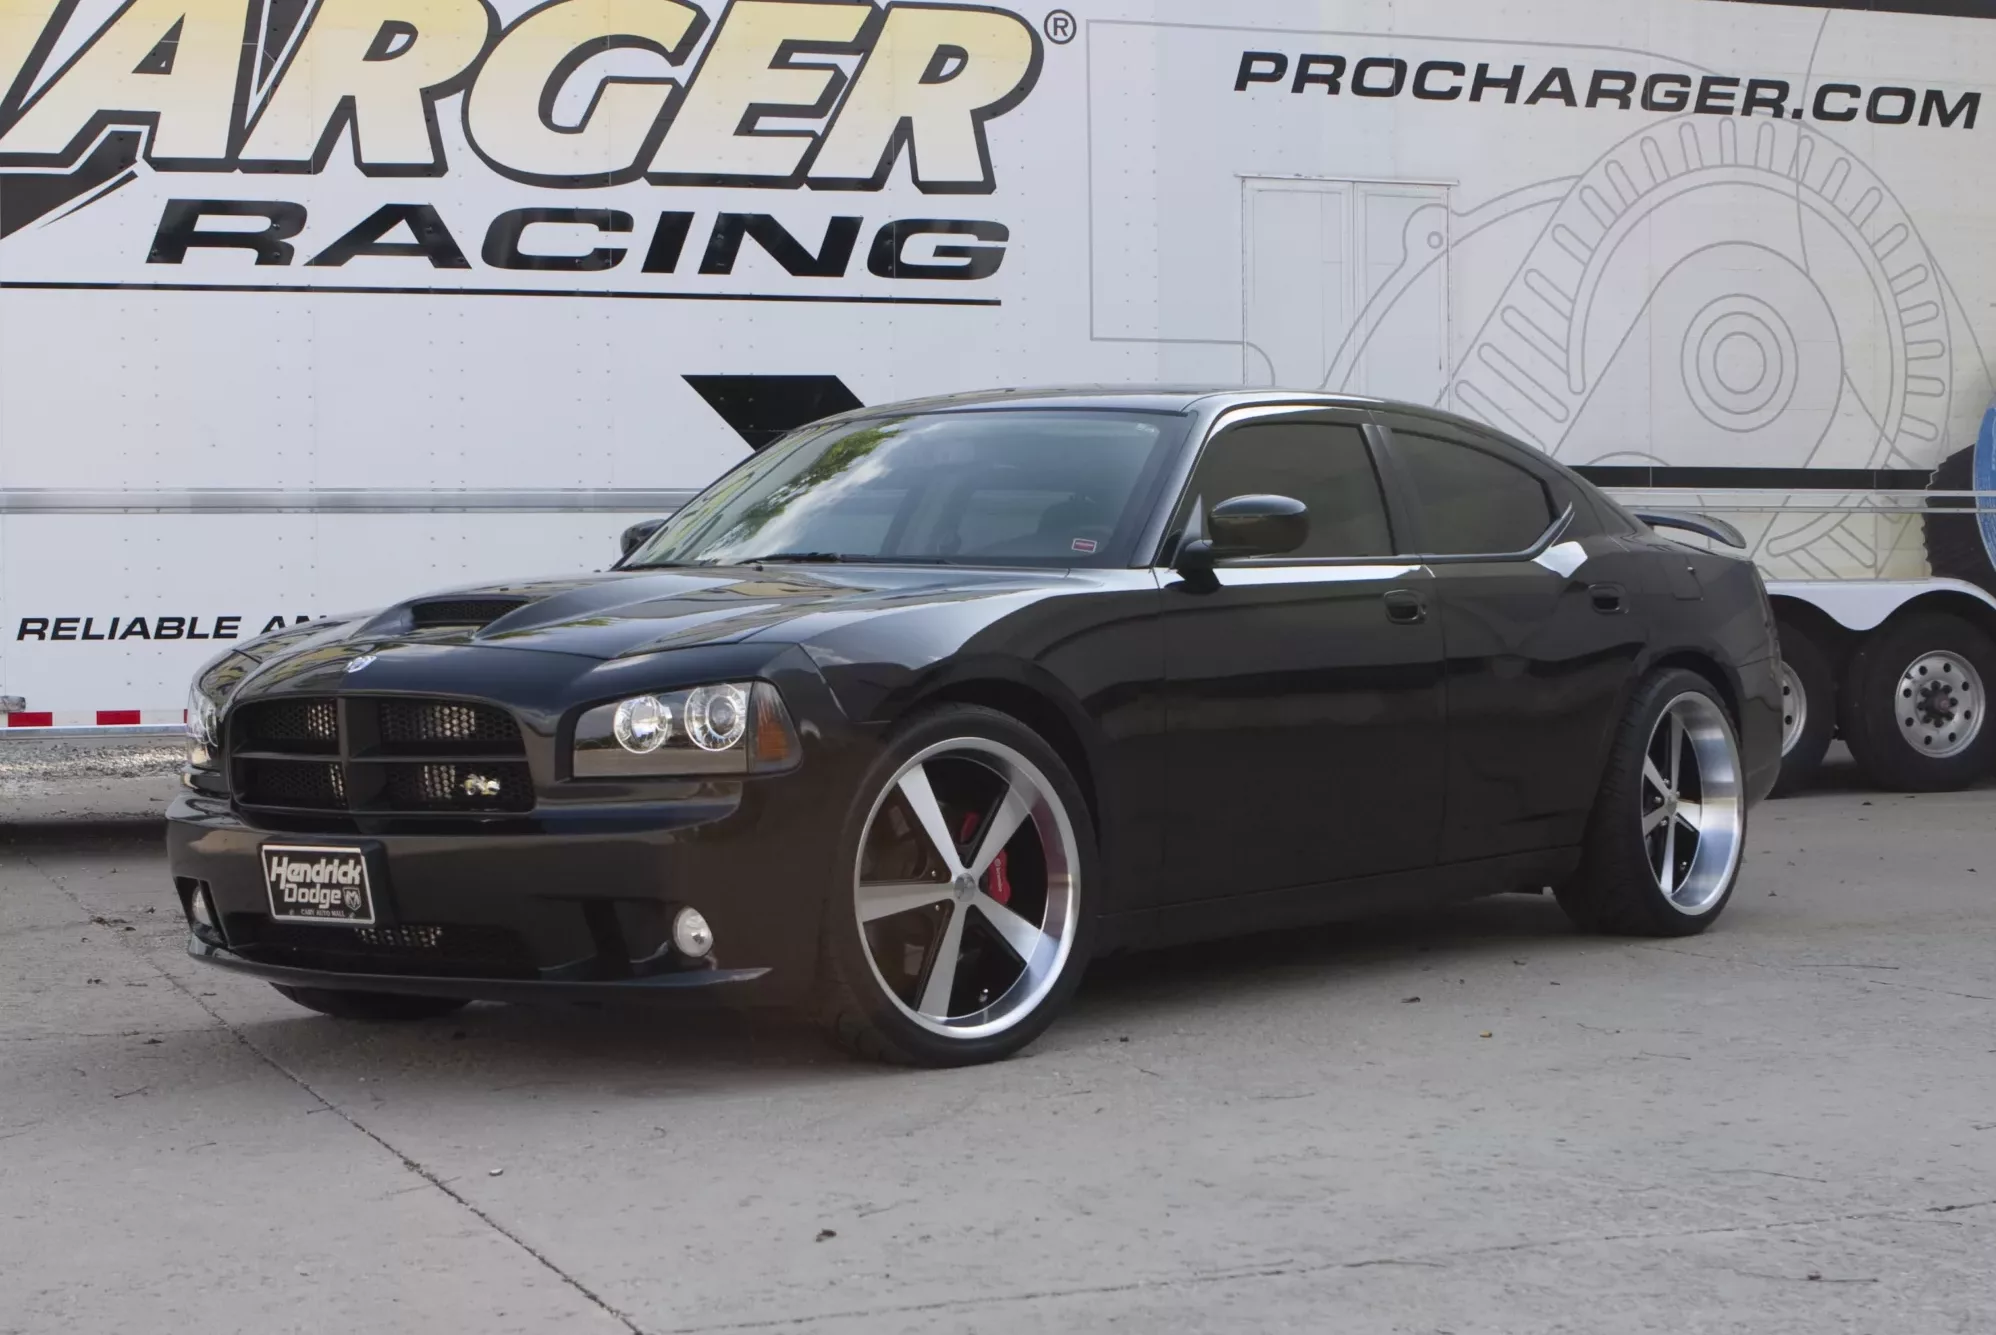 2010 Dodge Charger 6.1 ProCharged exterior